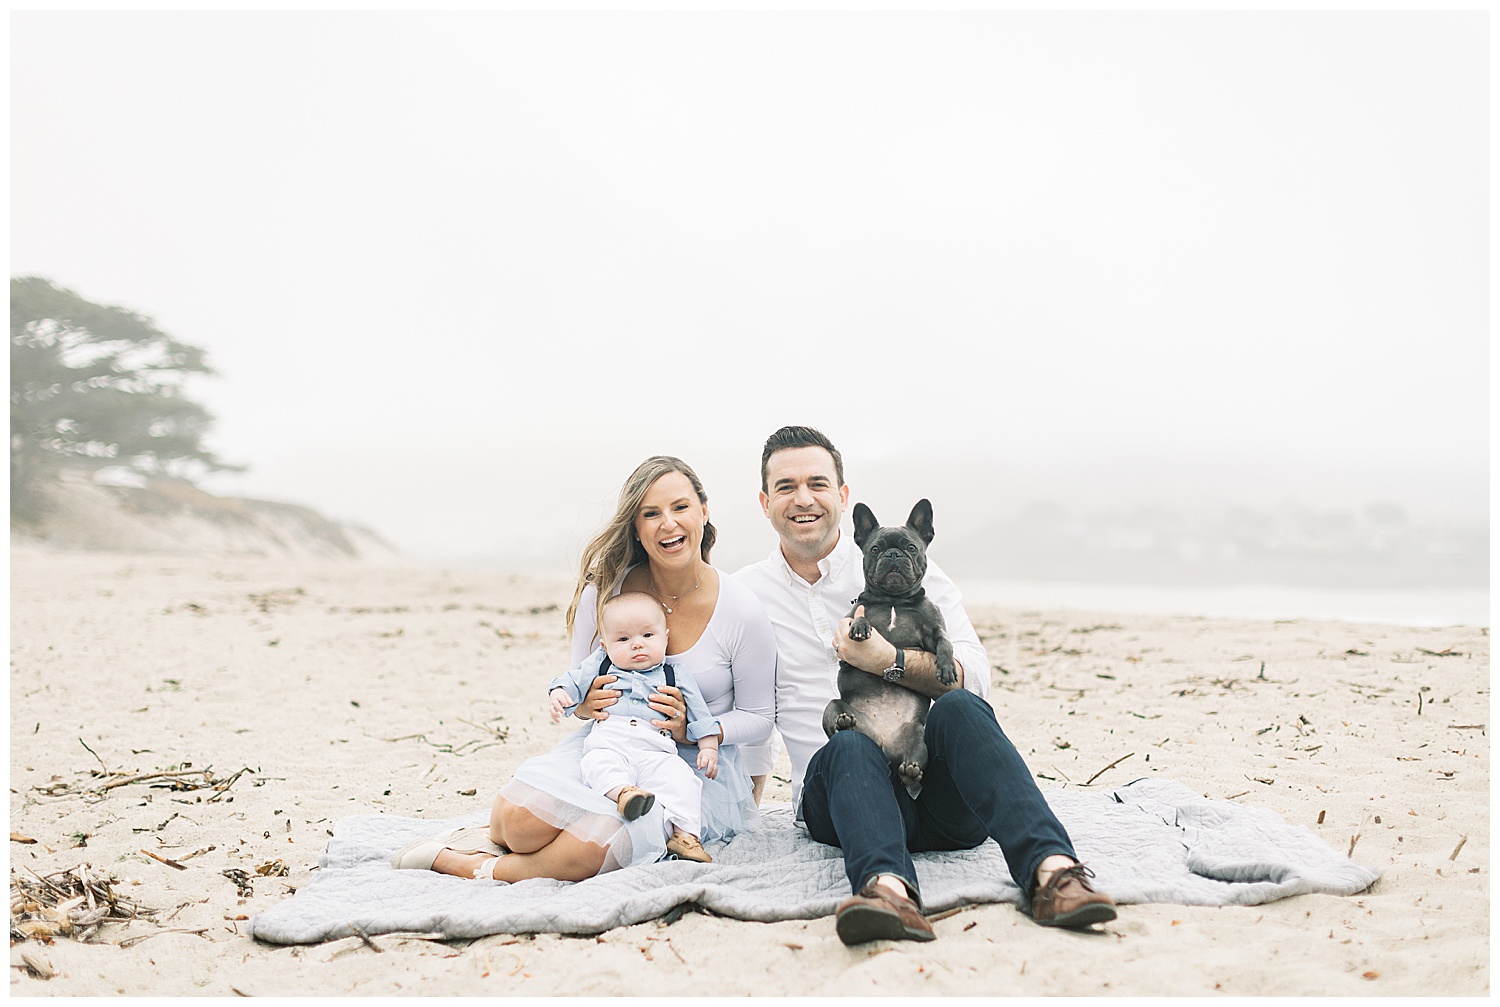 family film session in Carmel By The Sea featuring Morgan & Bill, their son Wills, and their Frenchie Olive